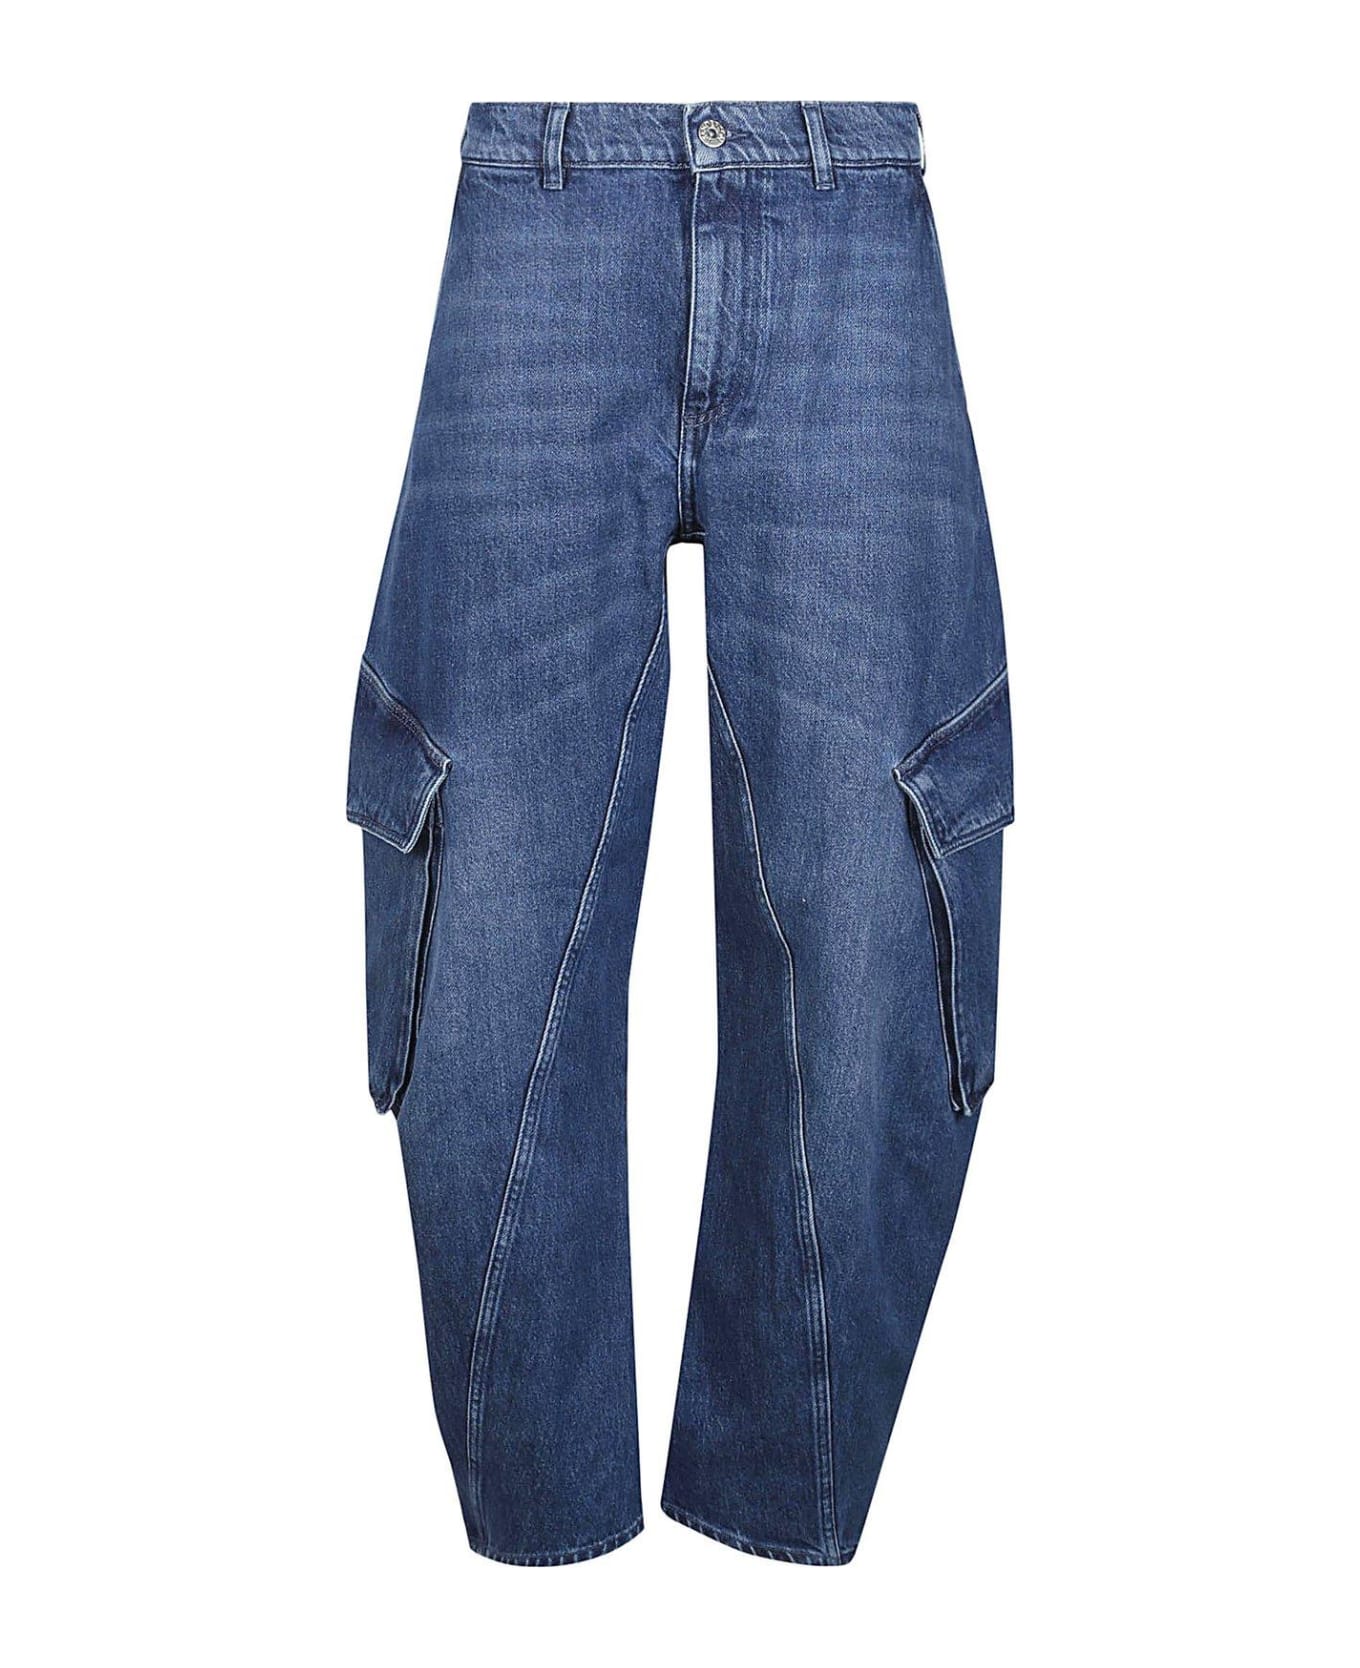 J.W. Anderson Logo Patch Tapered Jeans - BLUE デニム